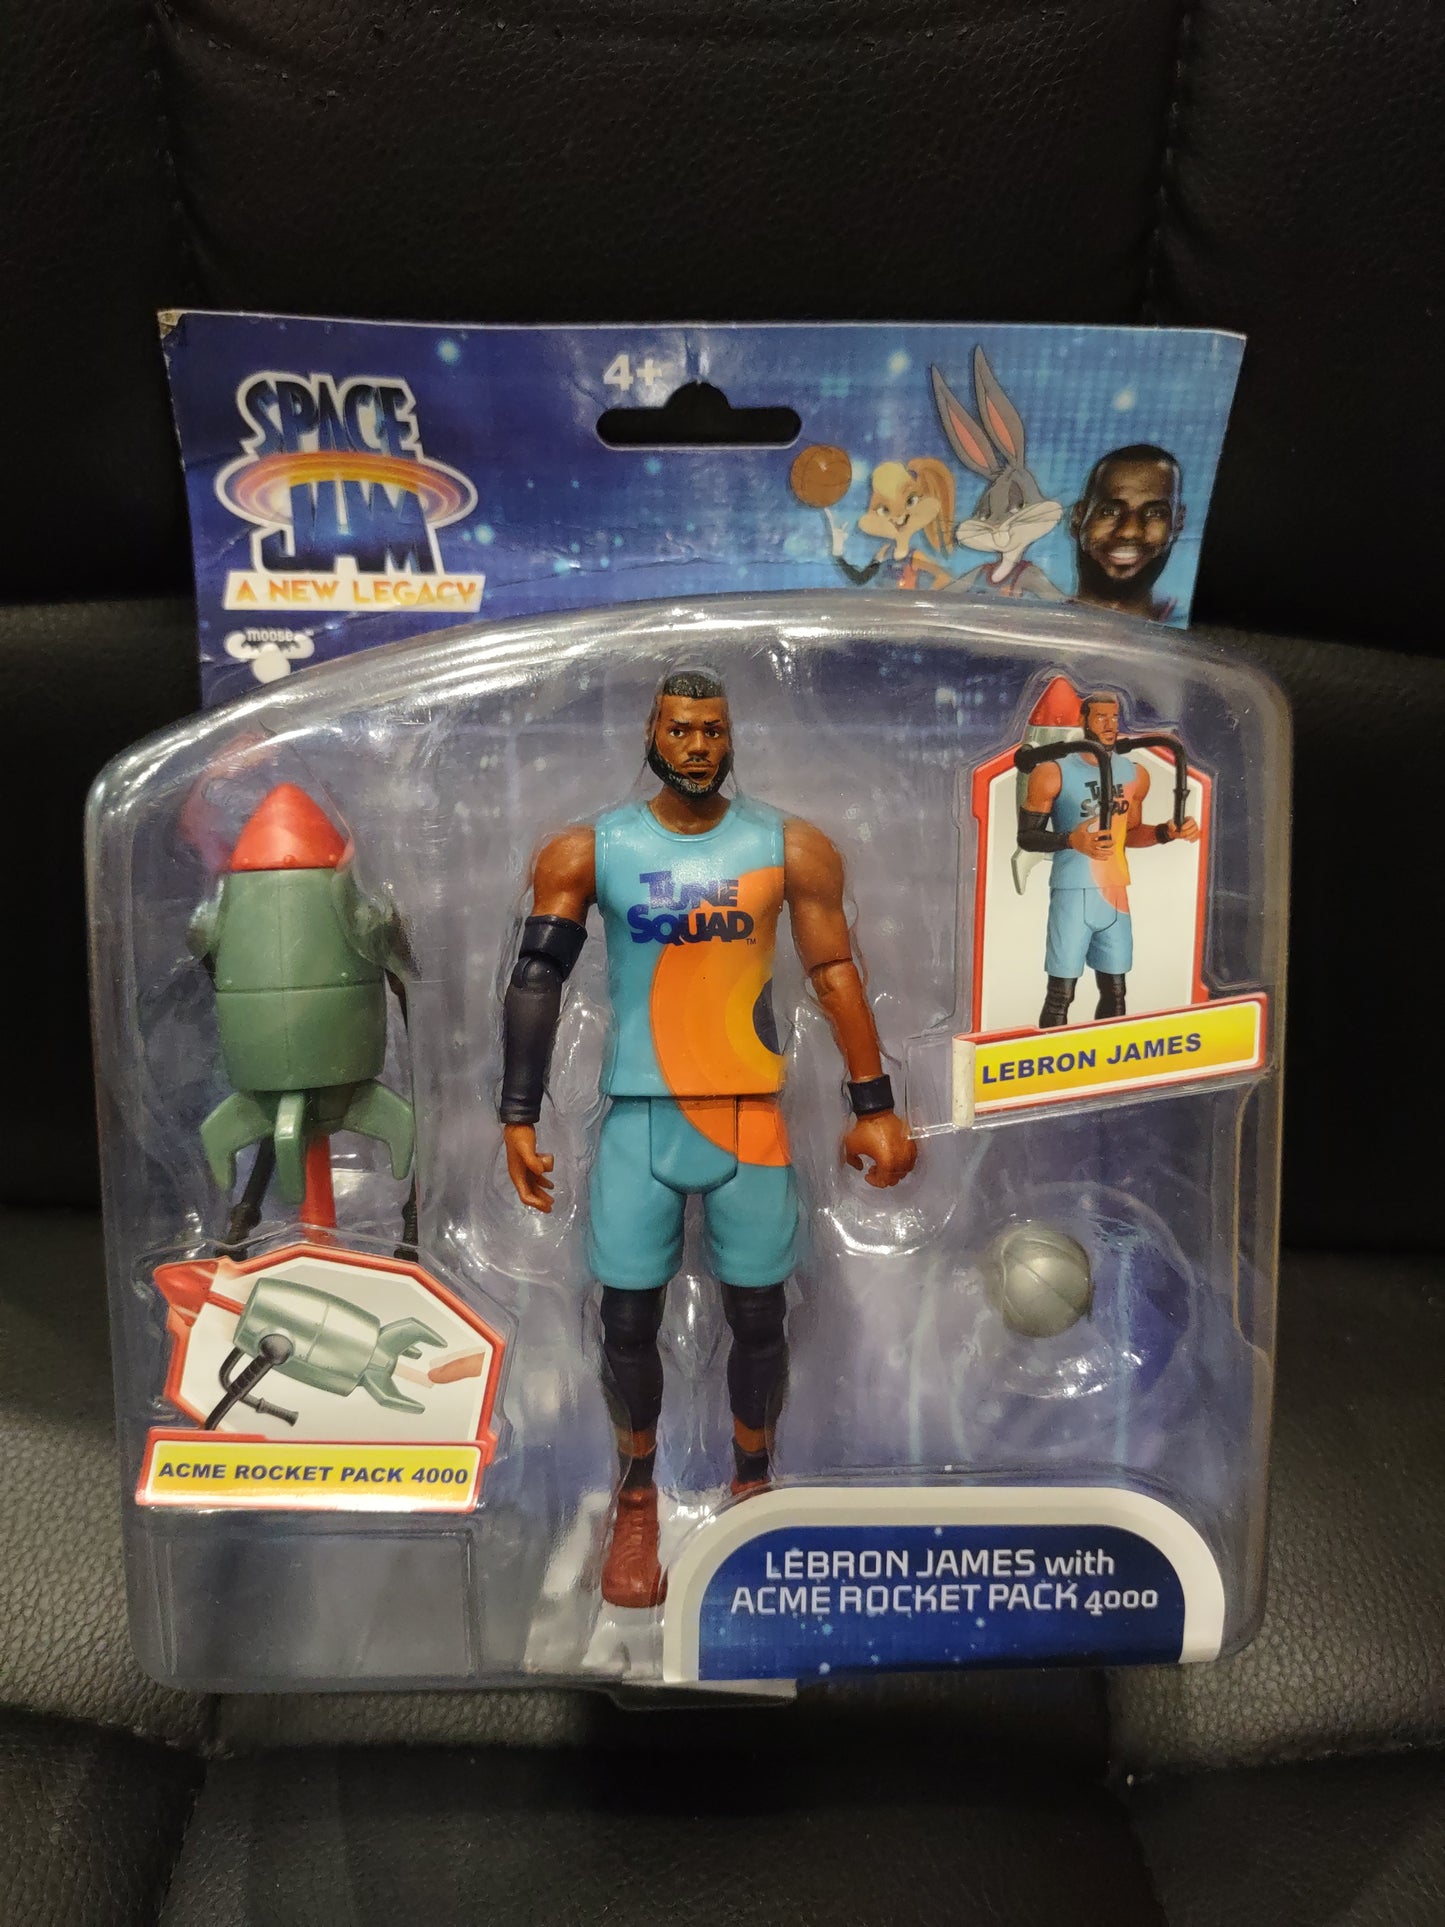 Action figure space jam a new Legacy LeBron James with acme Rocket pack 4000